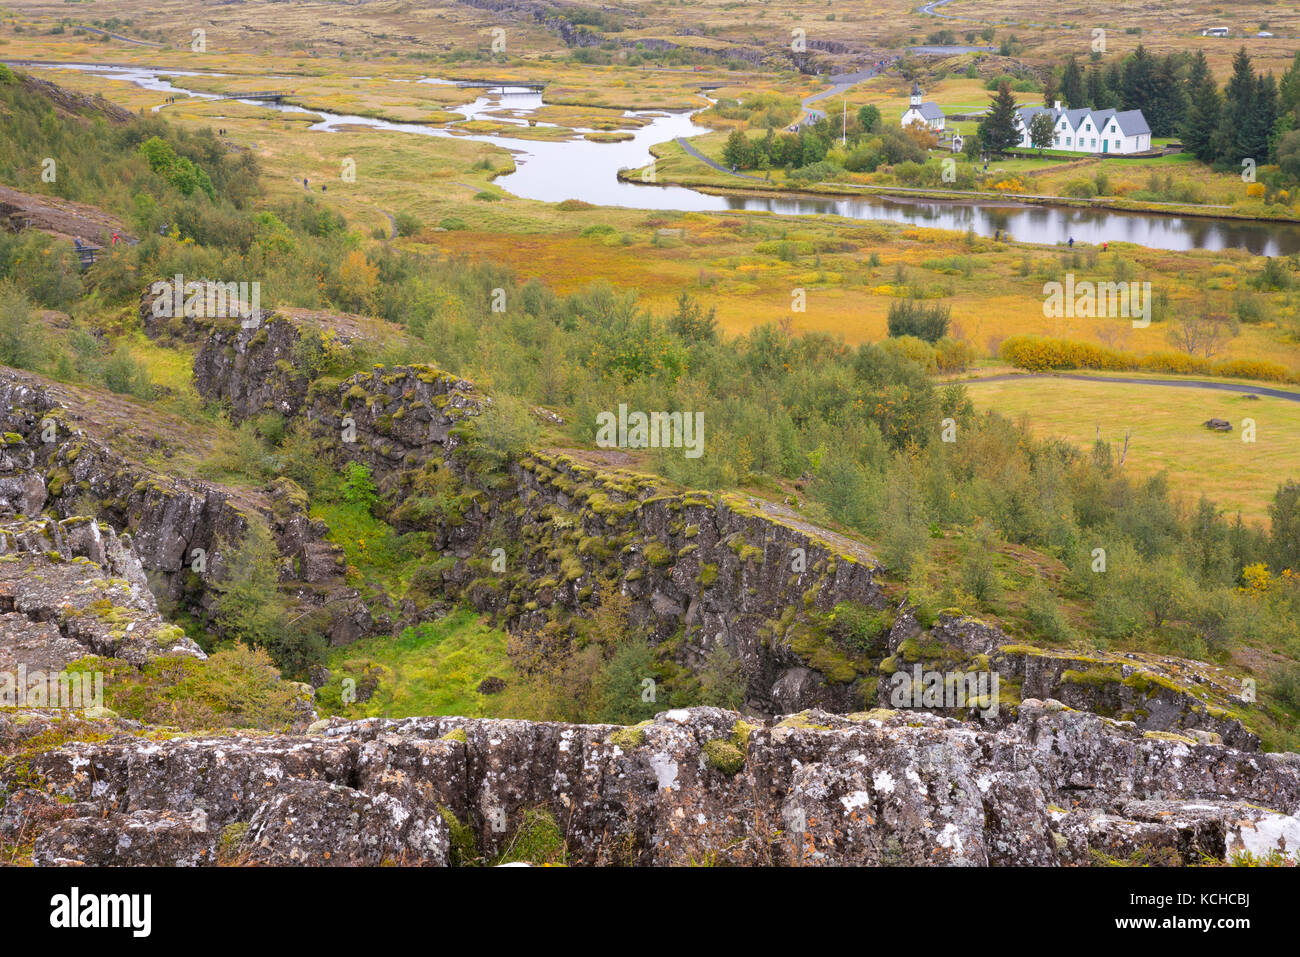 Overview of the Oxara River Valley and Historic Buildings, Pinngvellir National Park, Iceland Stock Photo